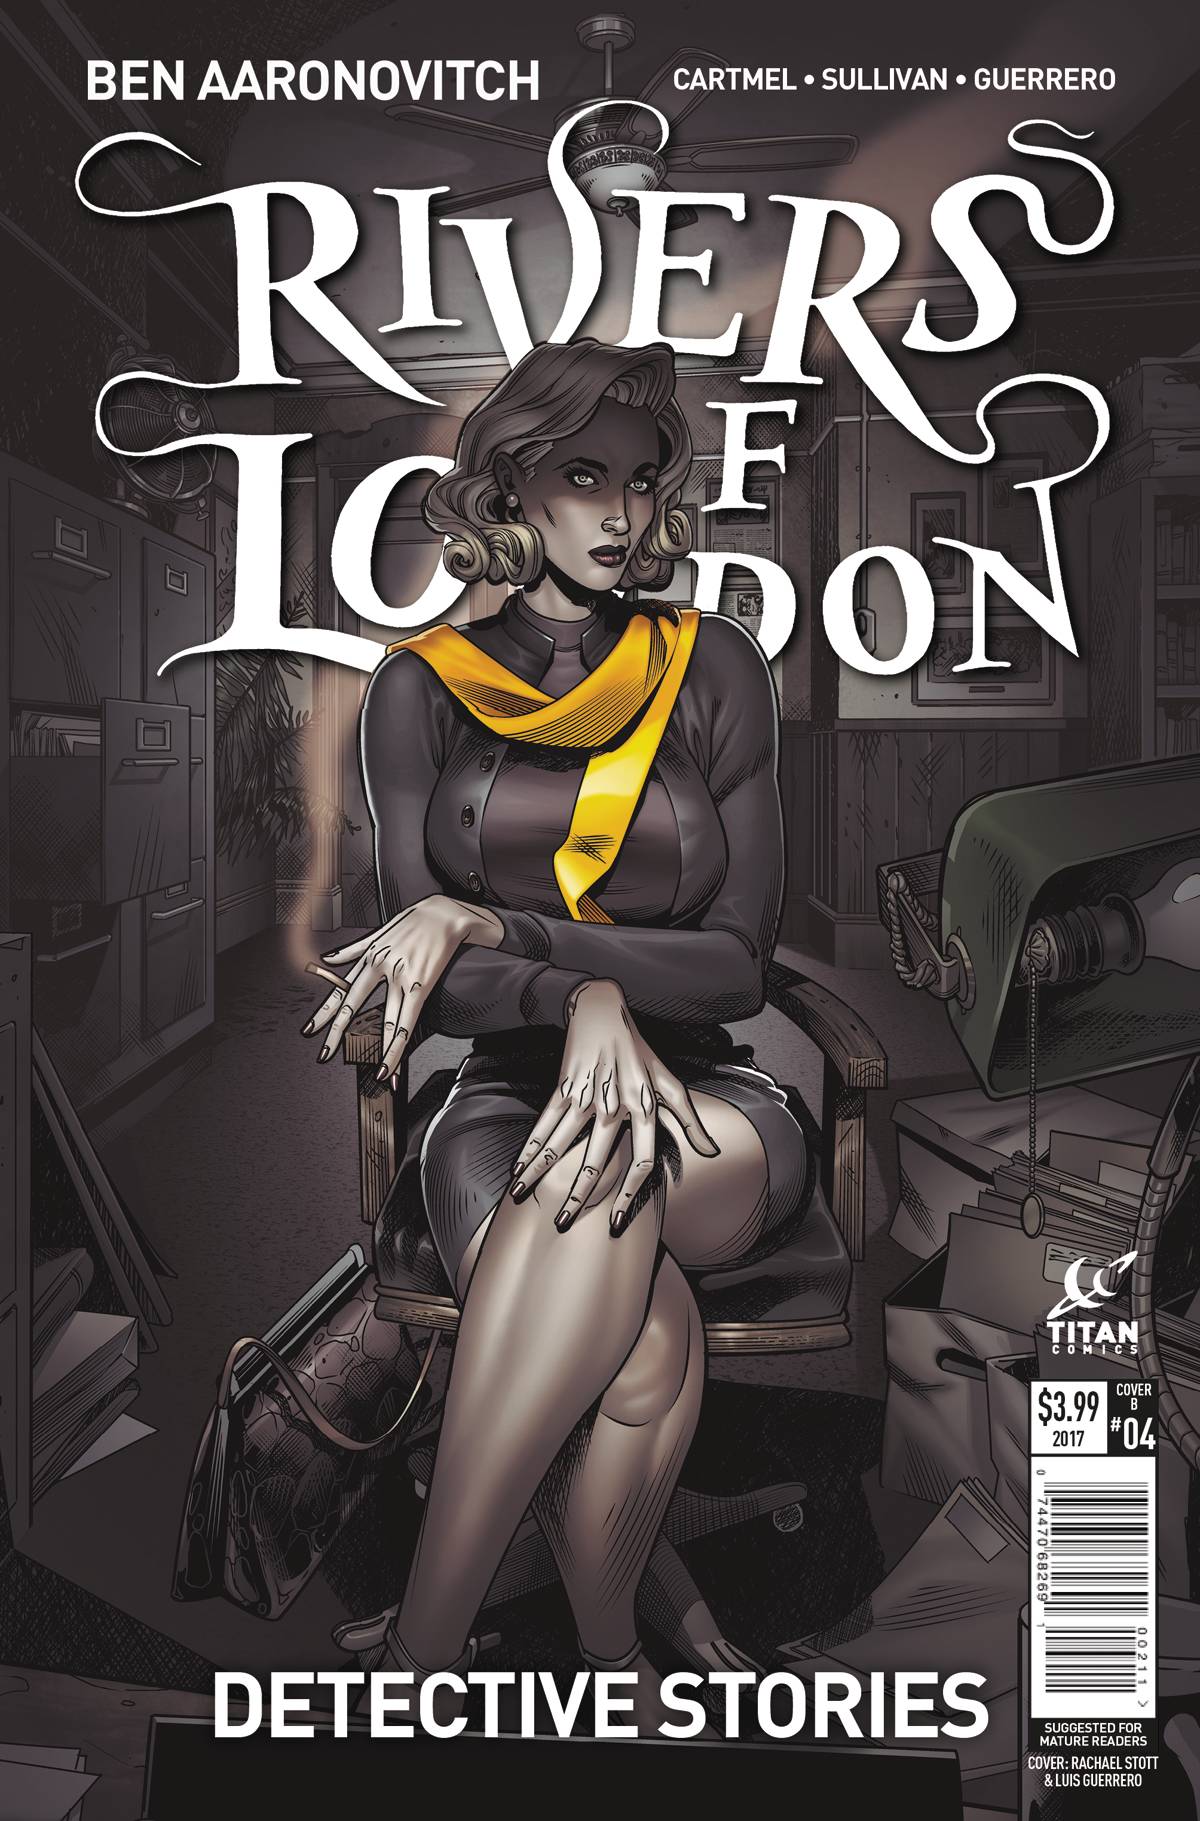 RIVERS OF LONDON: DETECTIVE STORIES#3